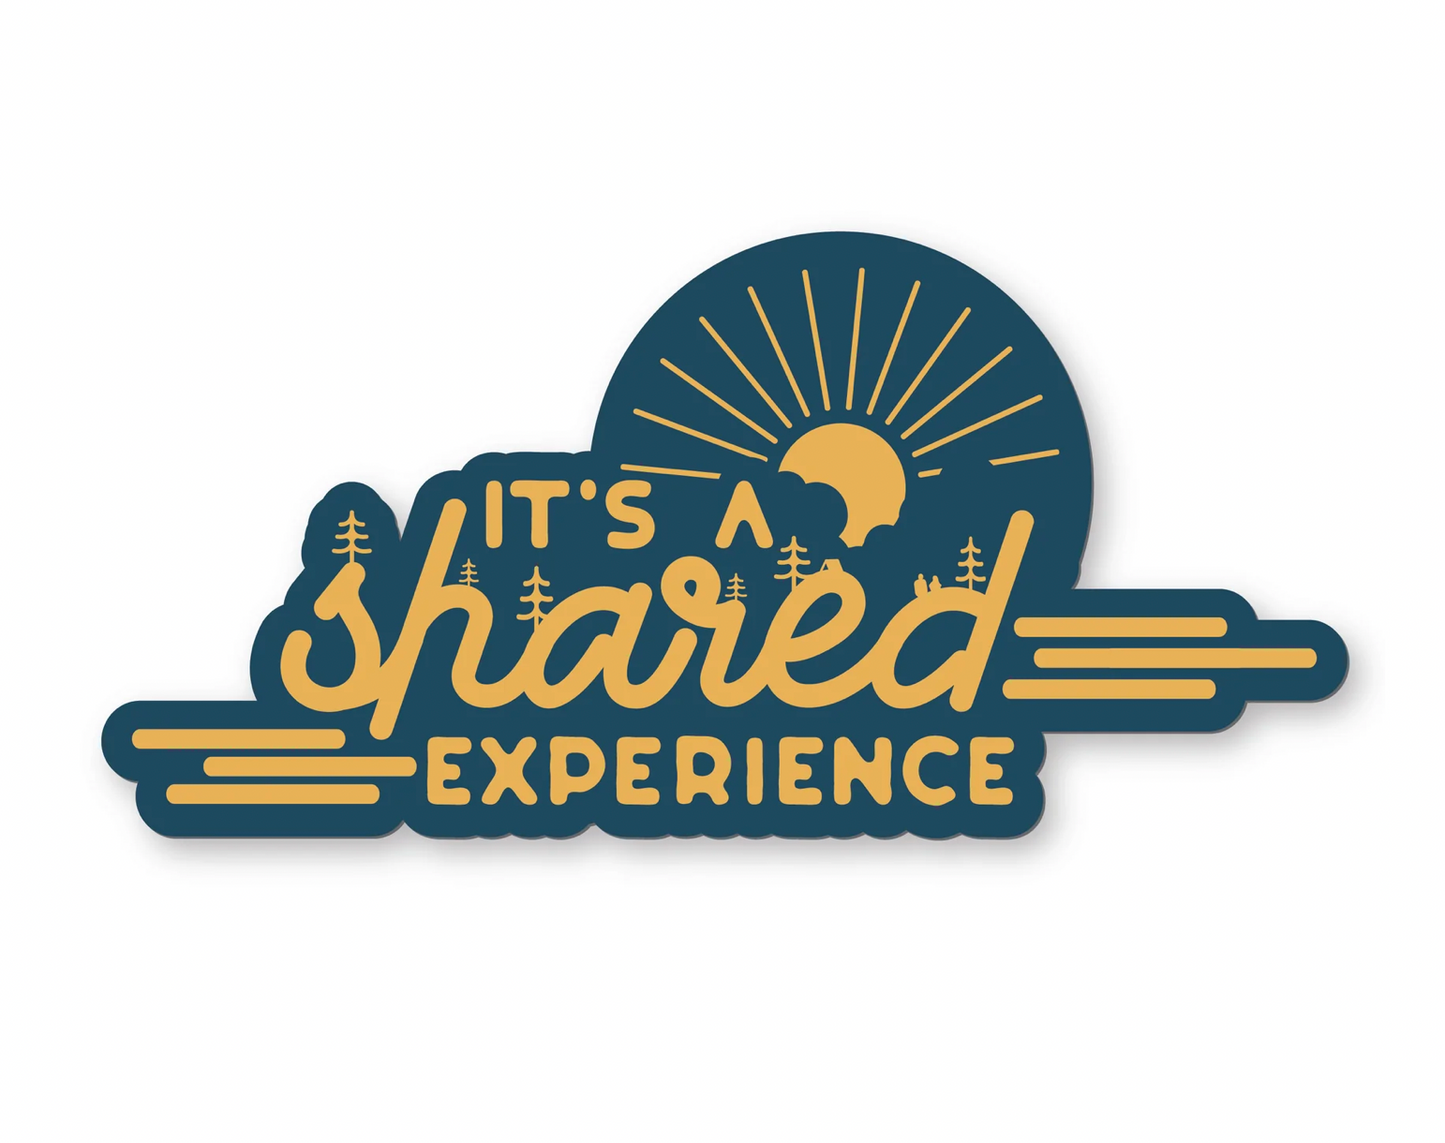 Shared Experience Sticker